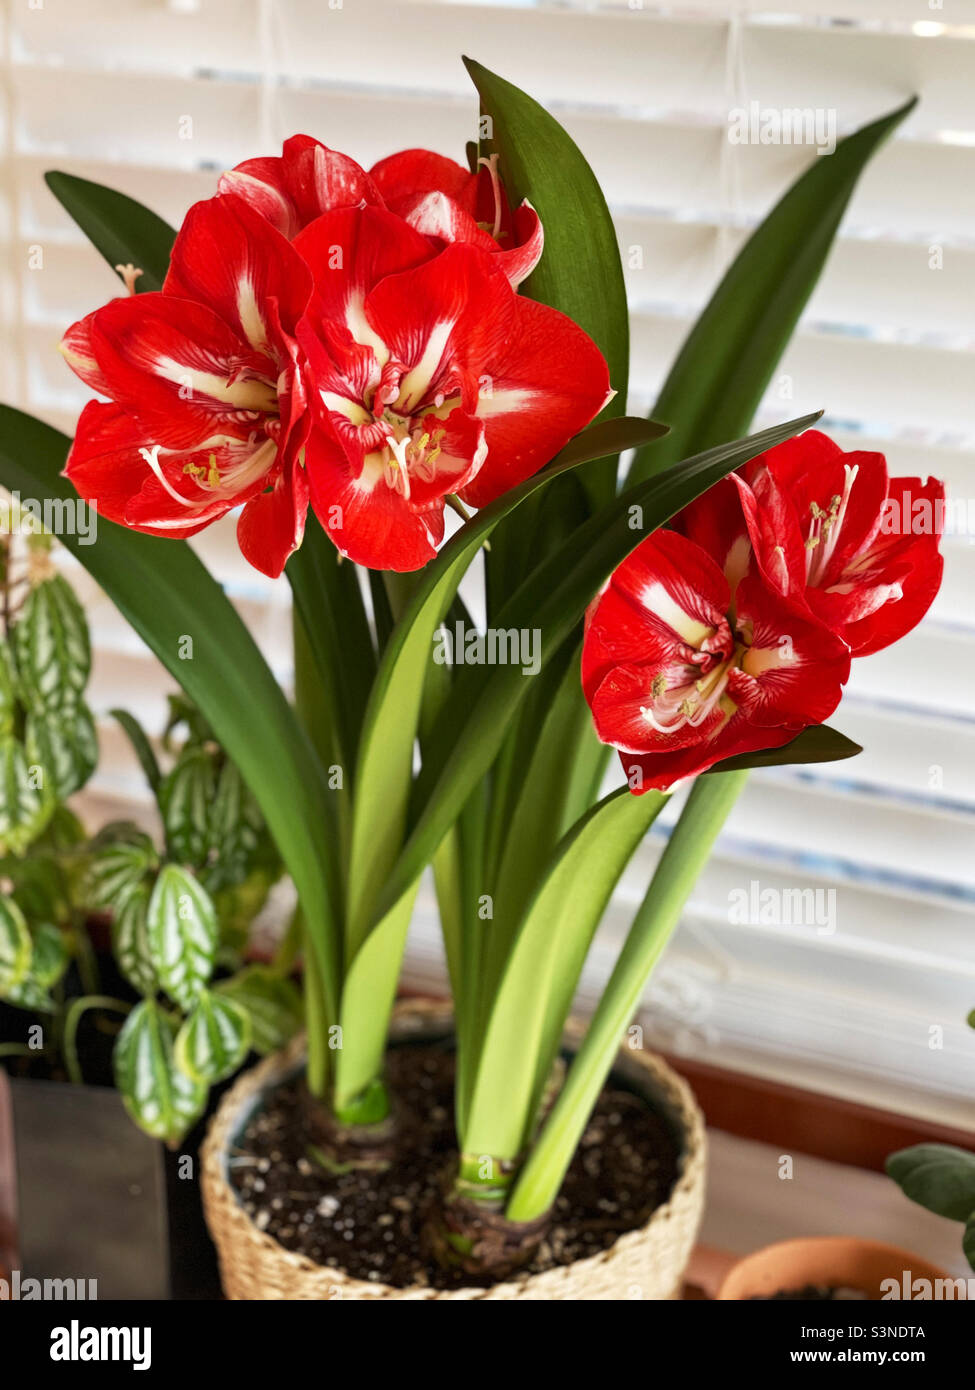 Gorgeous variegated red and white striped Amaryllis flower blossoms. Stock Photo